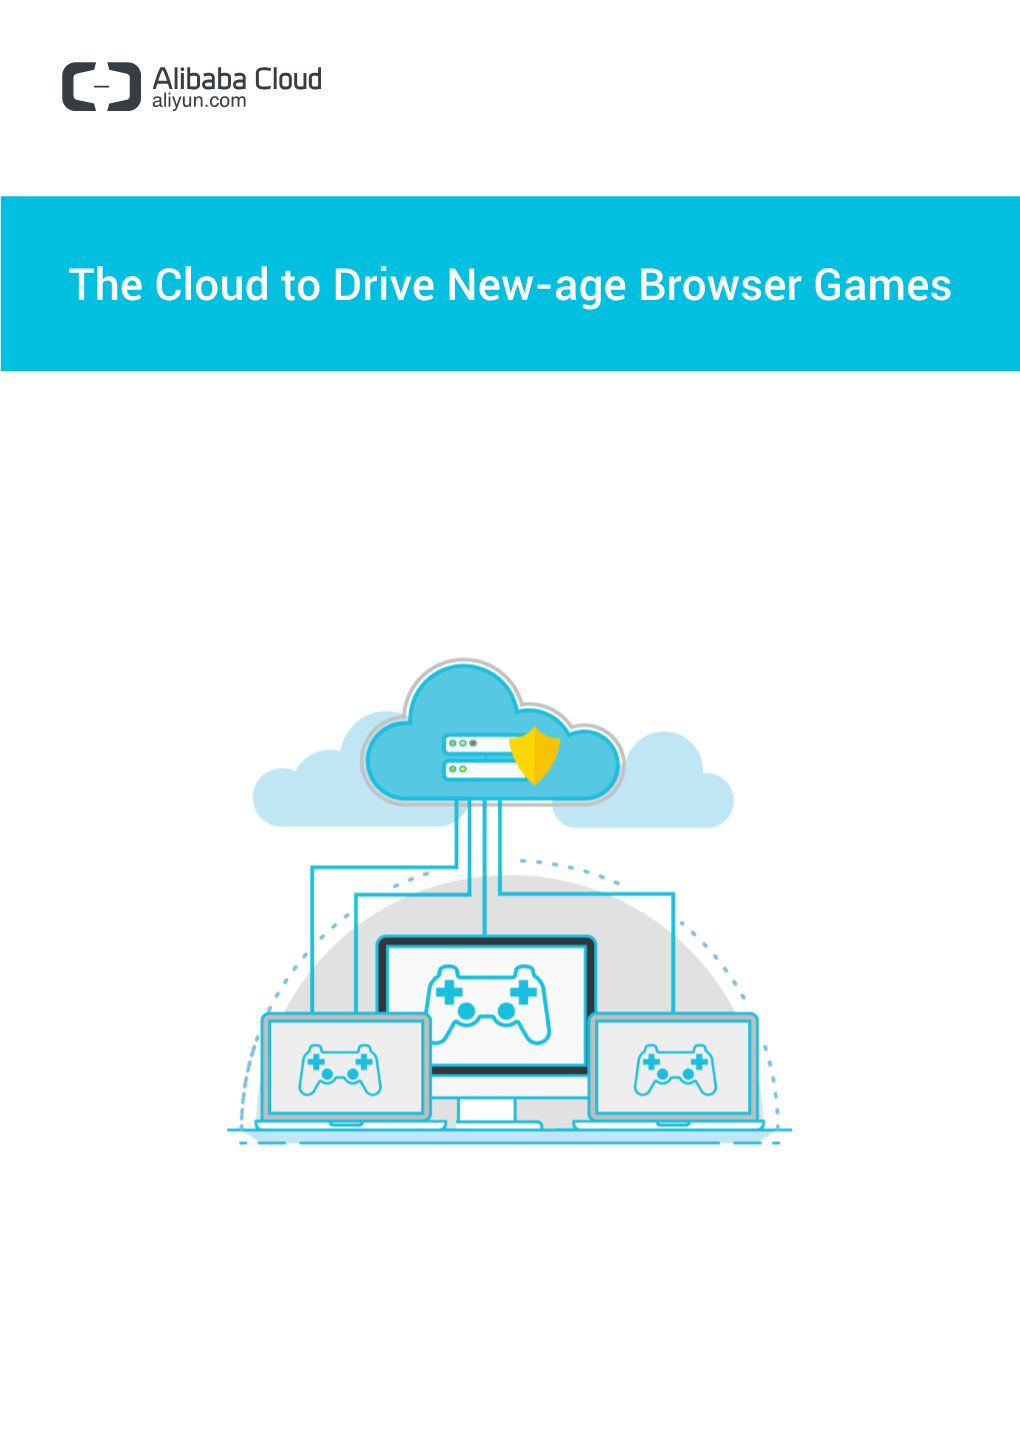 The Cloud to Drive New-Age Browser Games the Cloud to Drive New-Age Browser Games